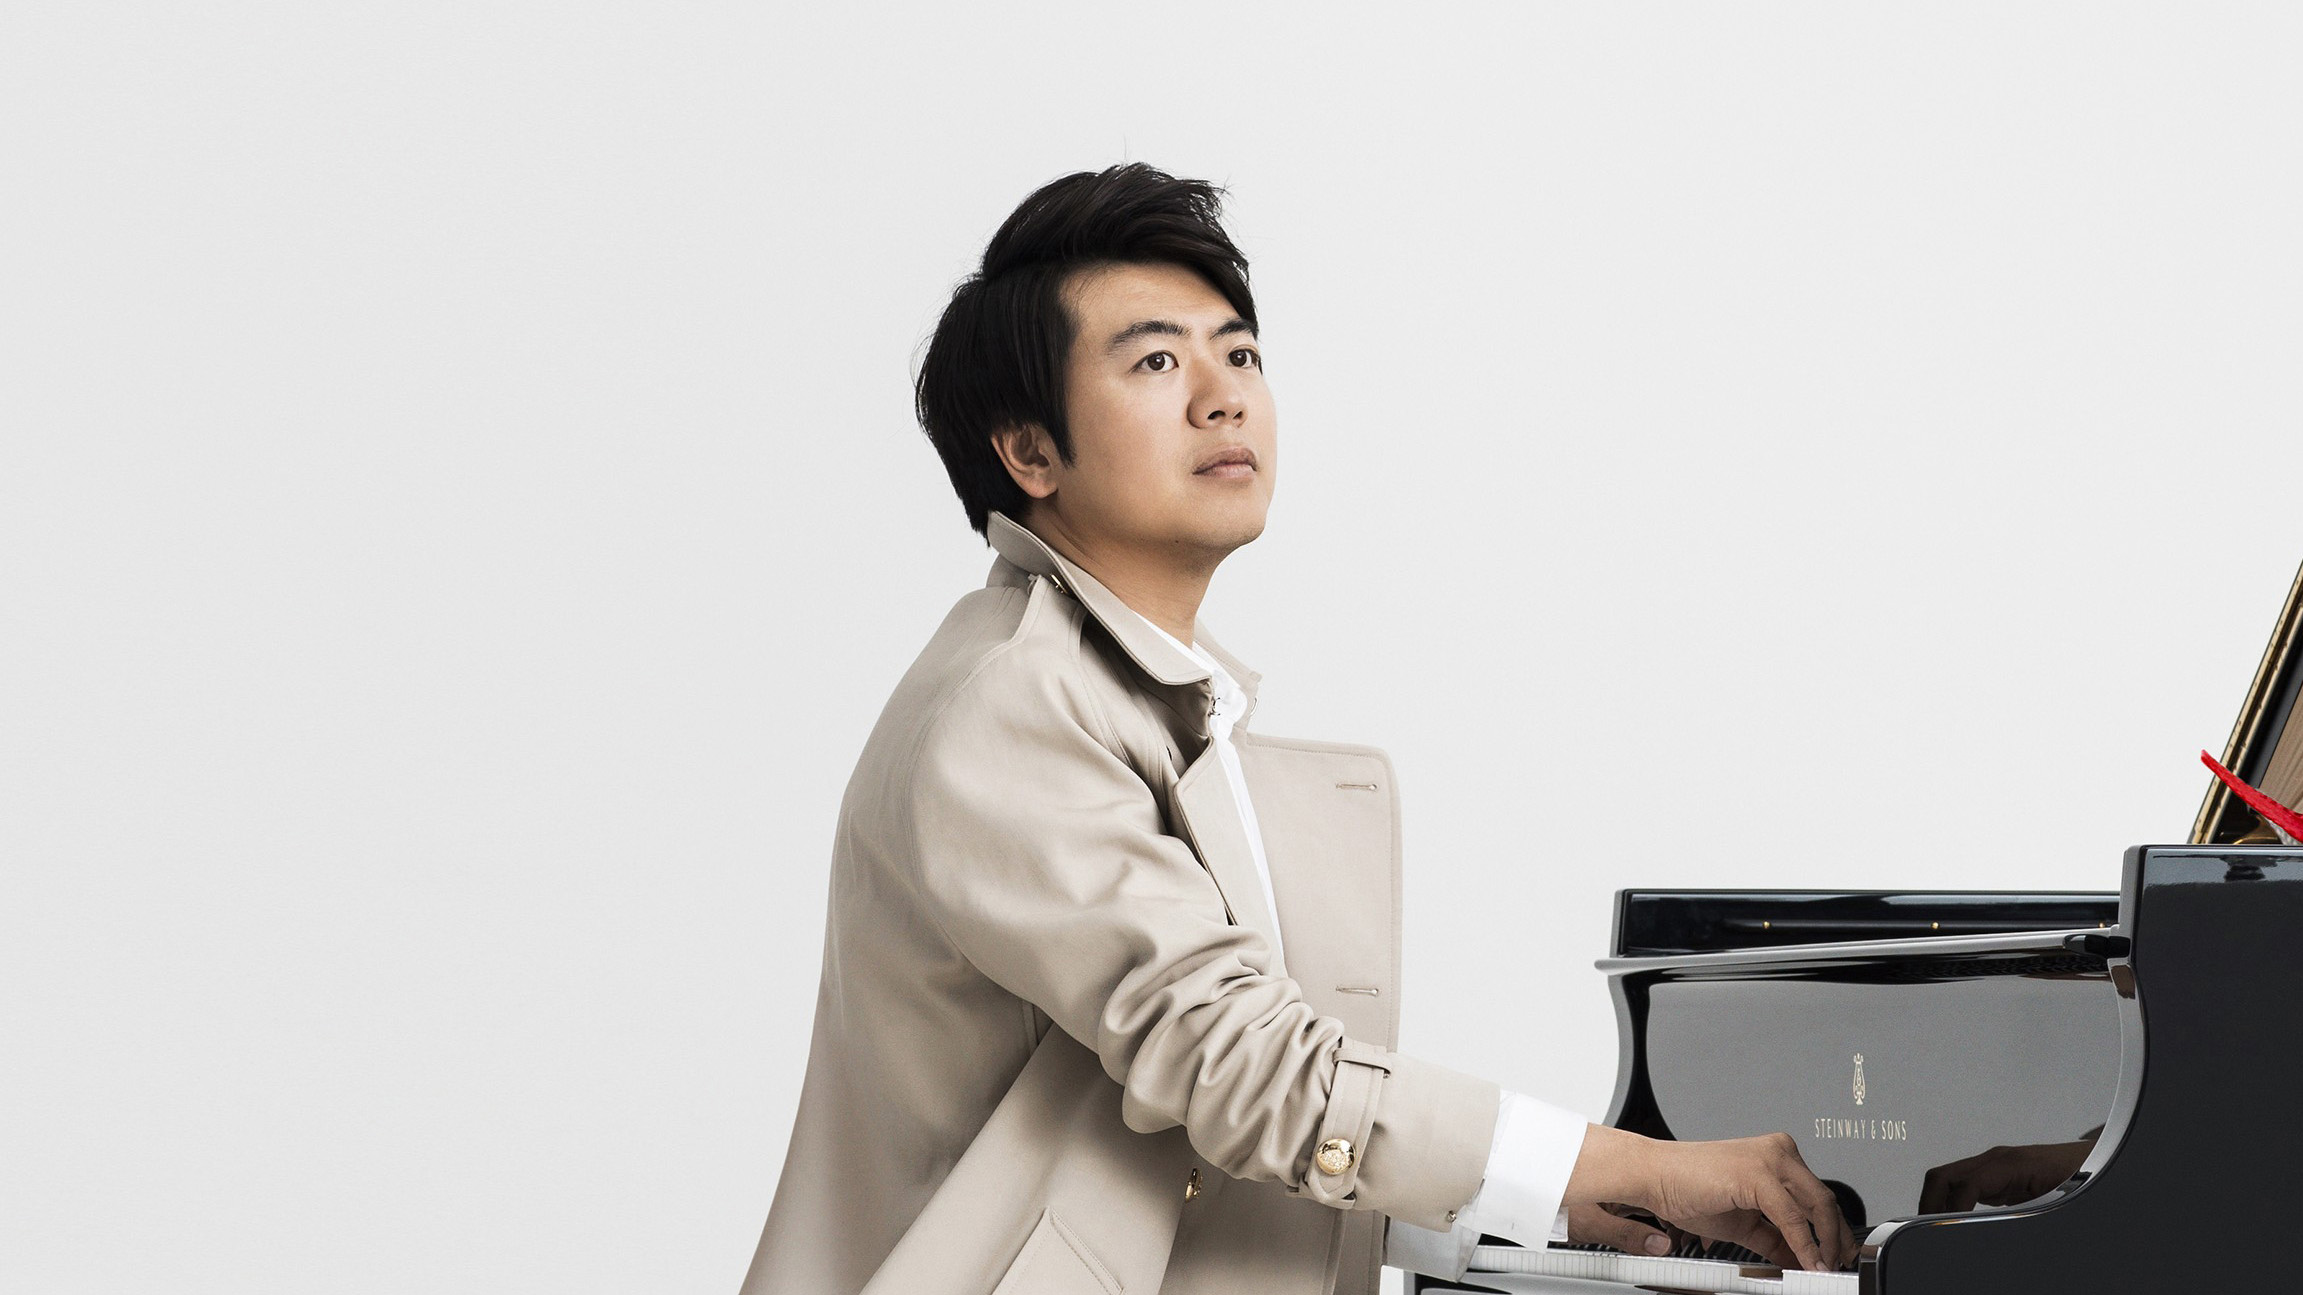 Lang Lang, a world-renowned pianist, sits at a Steinway piano wearing a white coat.